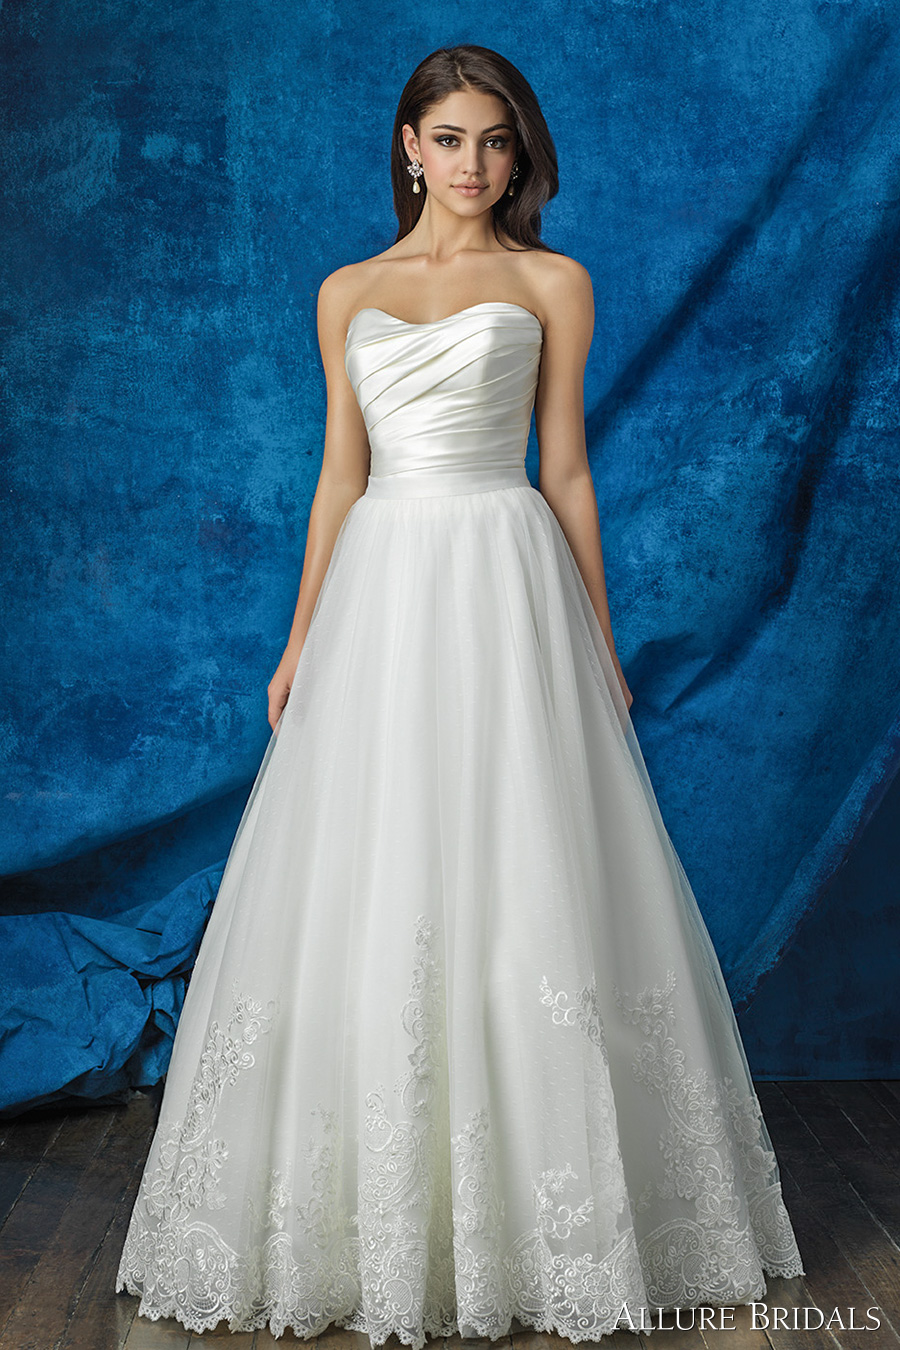 strapless sweetheart neckline satin pleated bodice simple clean princess romantic tulle skirt embellished hem skirt a  line wedding dress chapel train (a2000 top and a2012 skirt) mv